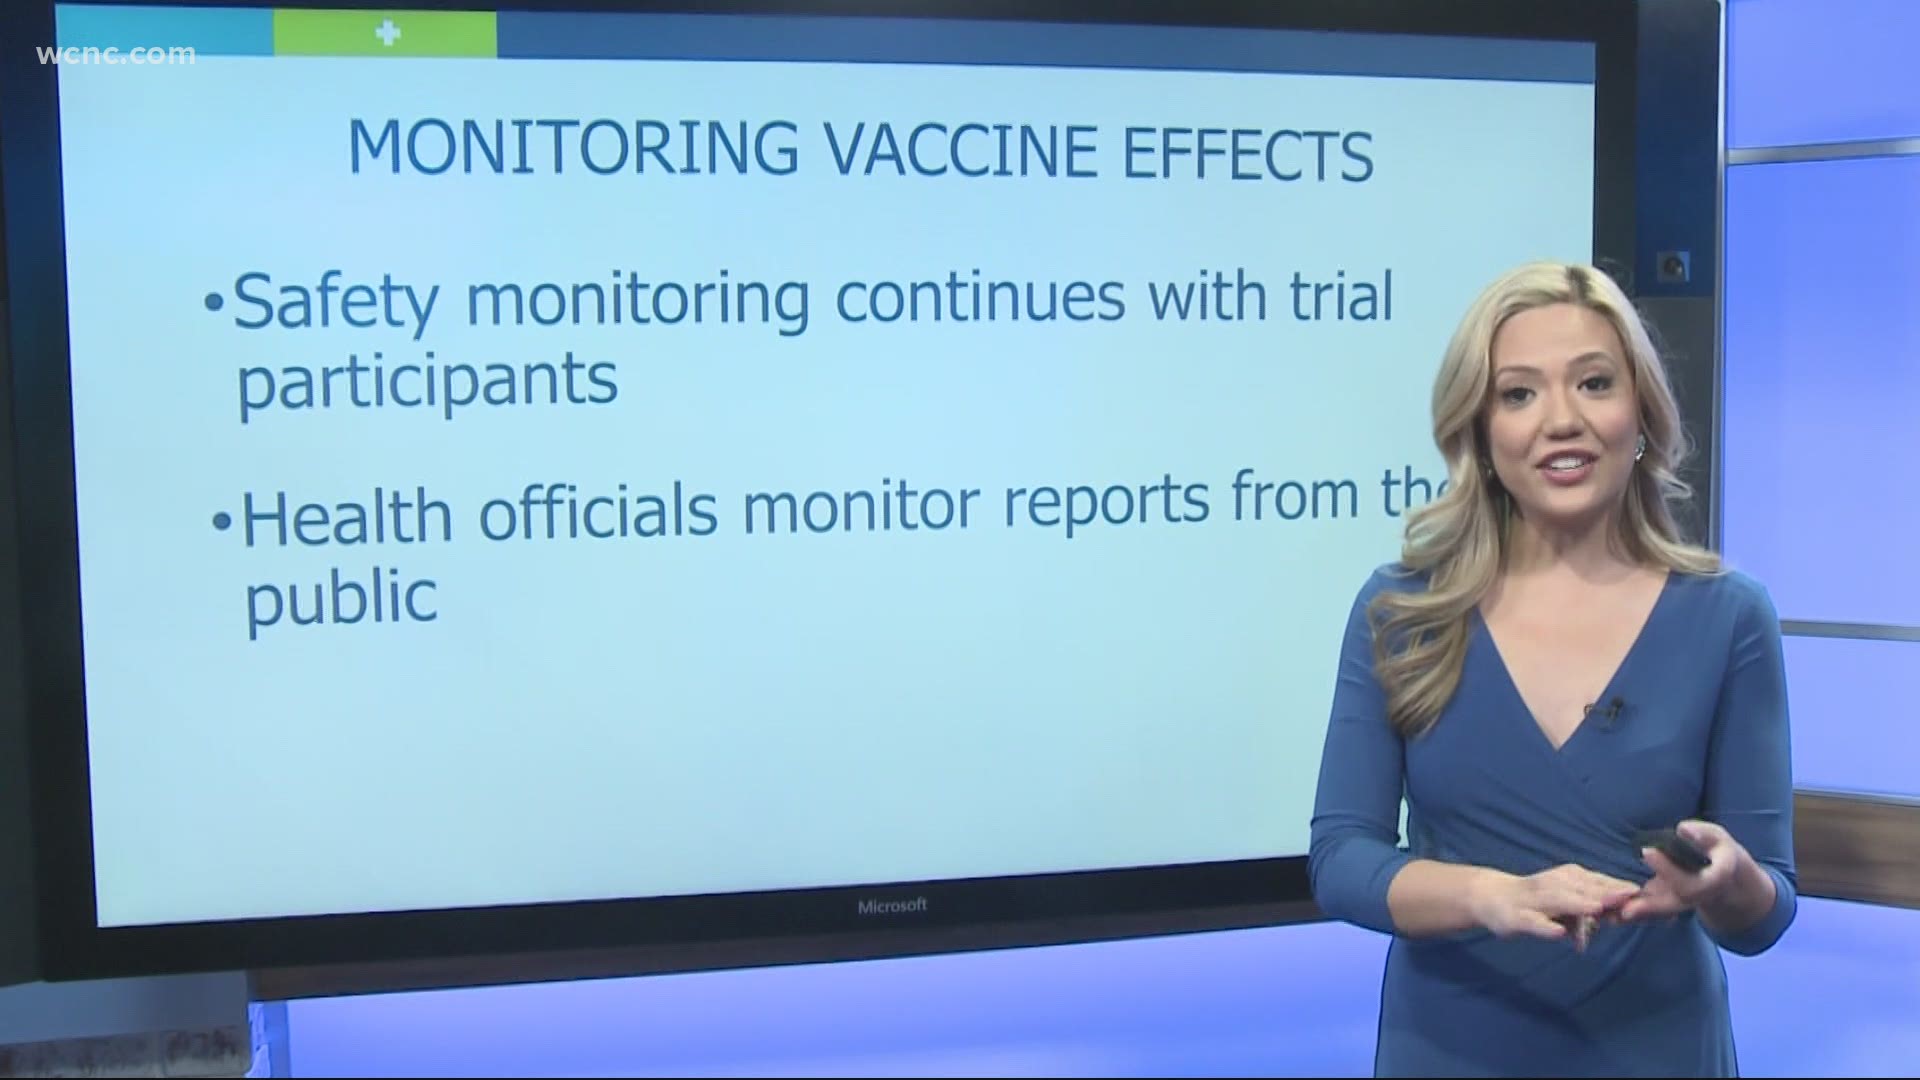 To help battle hesitancy against the COVID-19 vaccine, health officials explain side effects from any vaccine shot typically happen within two months.